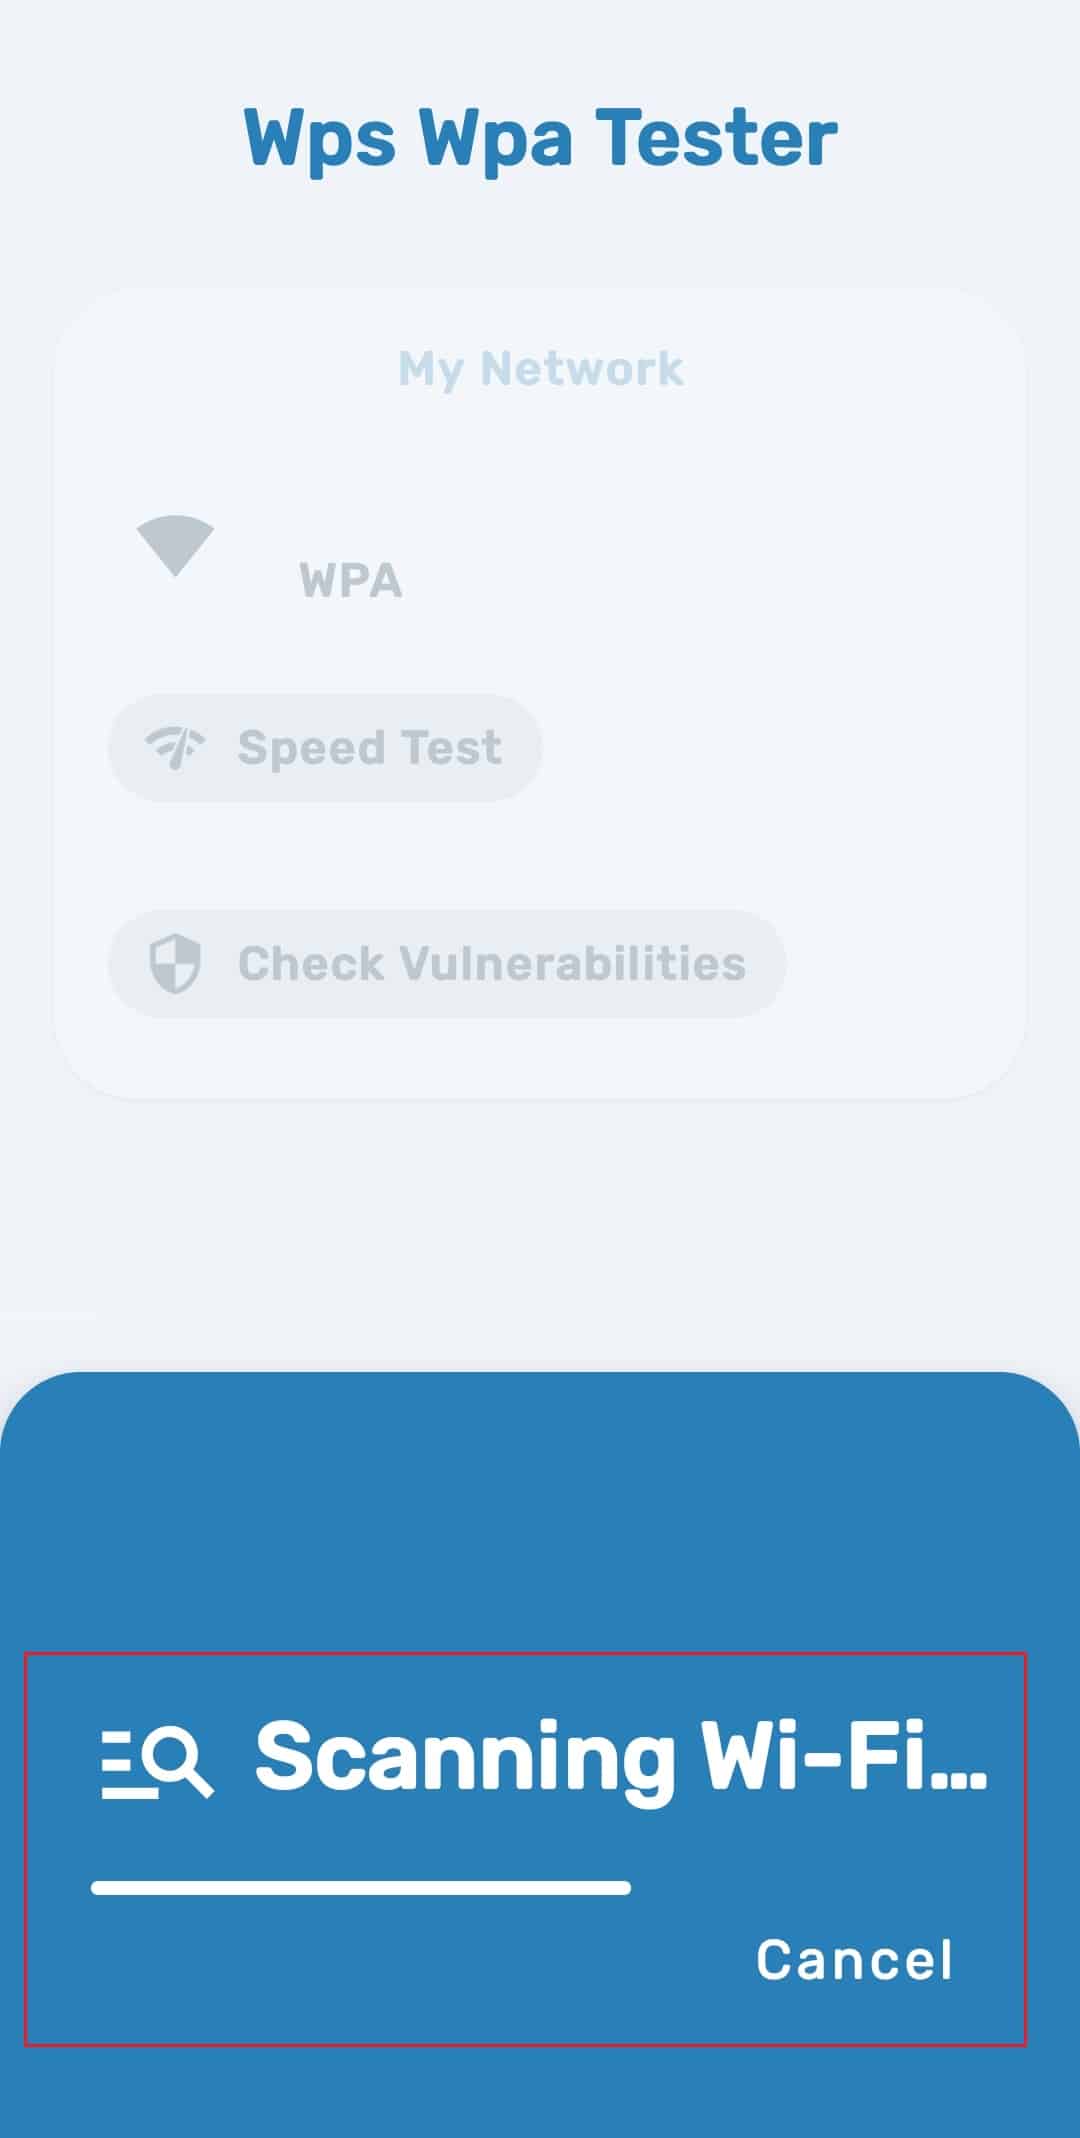 scanning networks WiFi WPS WPA Tester android app